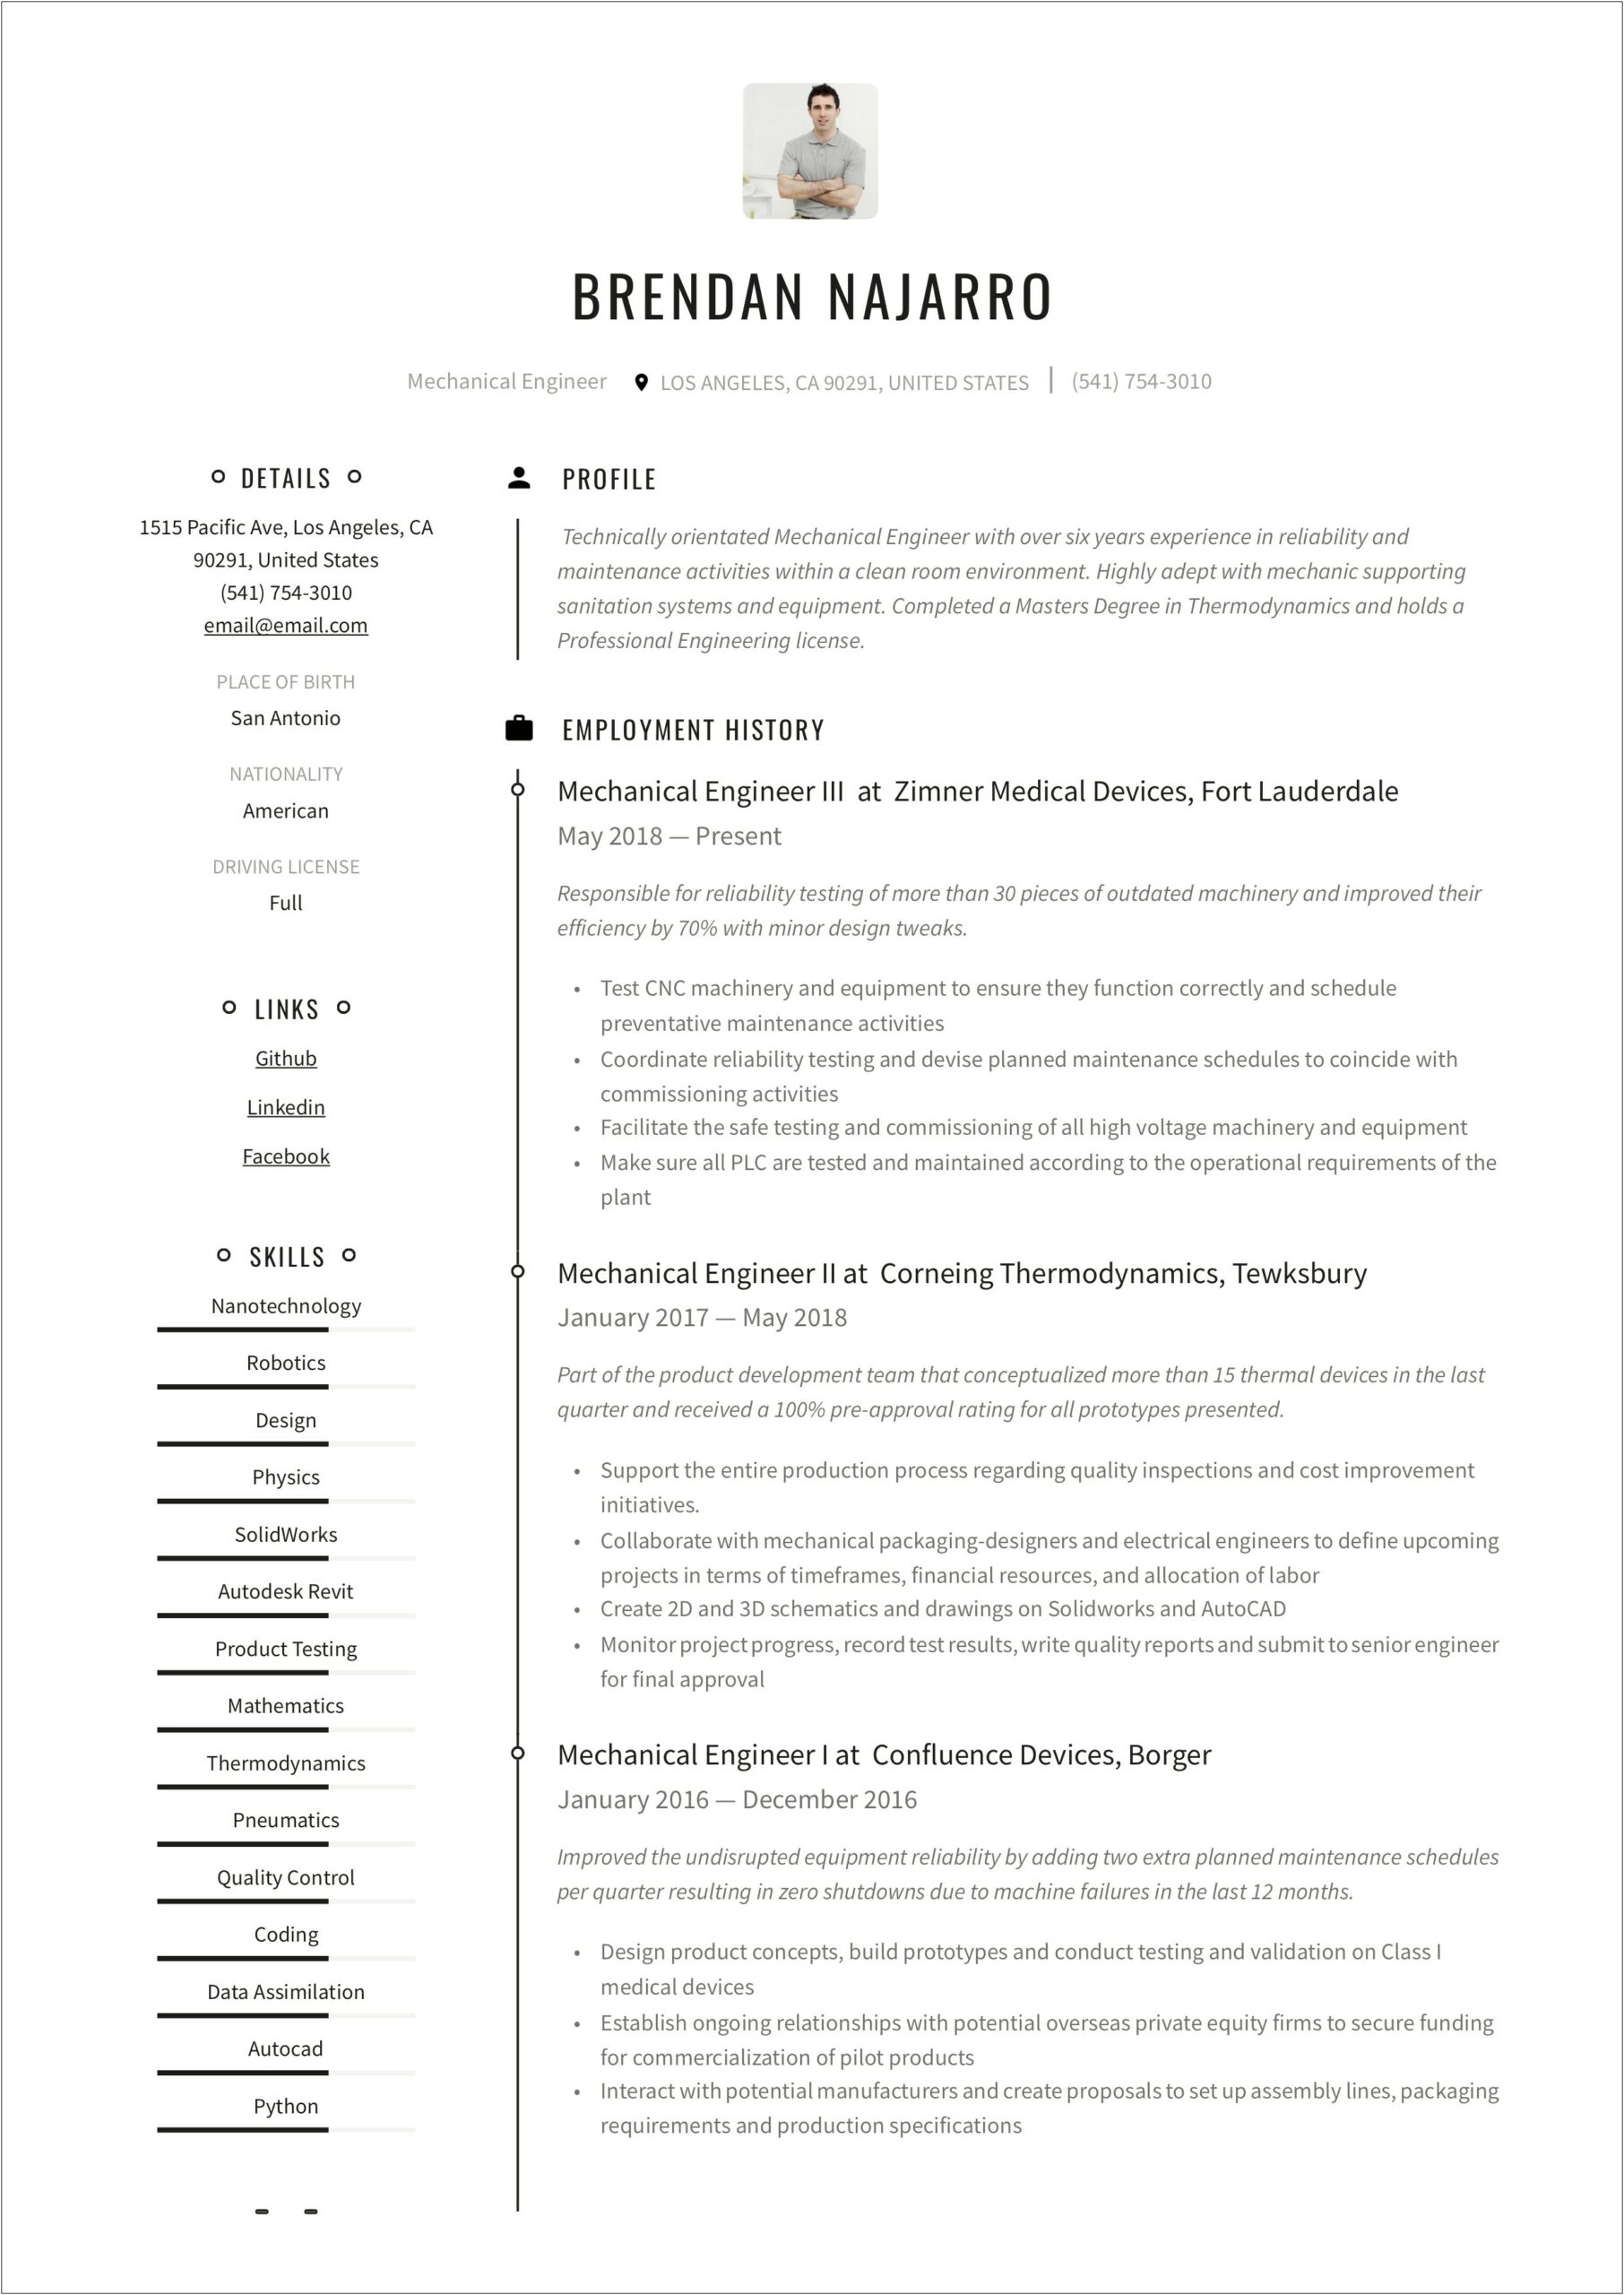 Computer Aided Mechanical Drafting Resume Examples